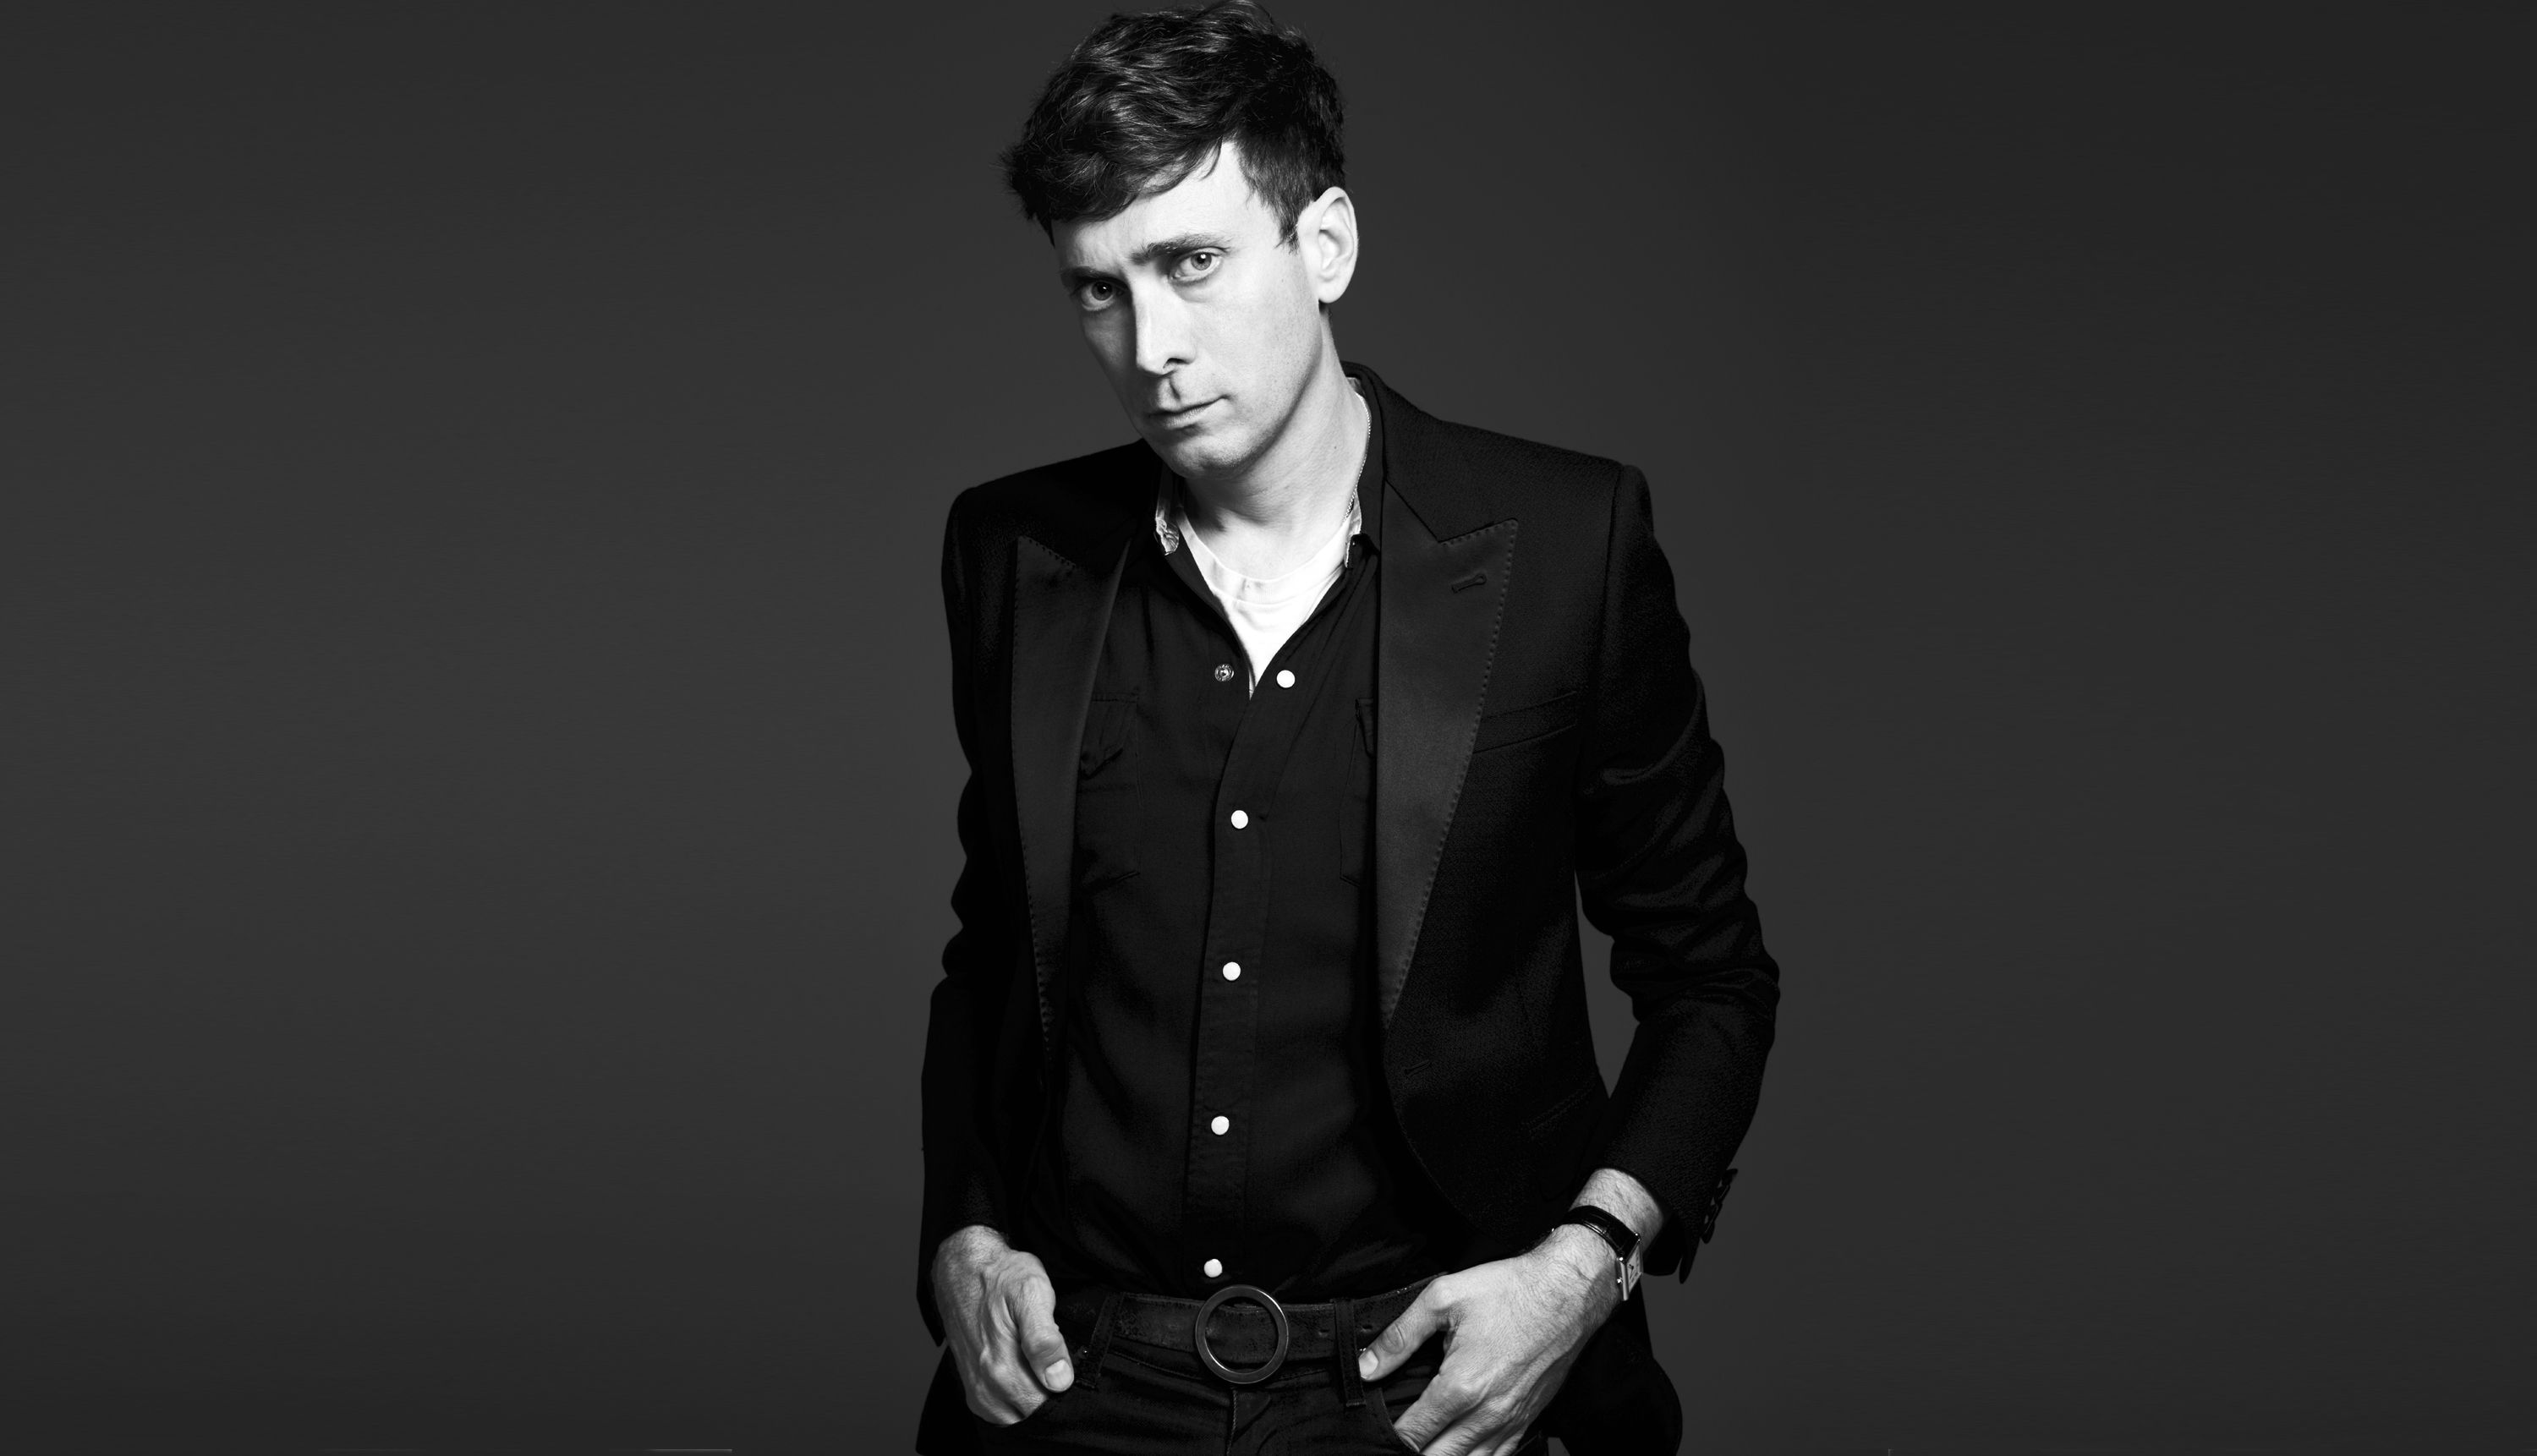 Hedi Slimane takes over Céline to launch menswear, couture and fragrance